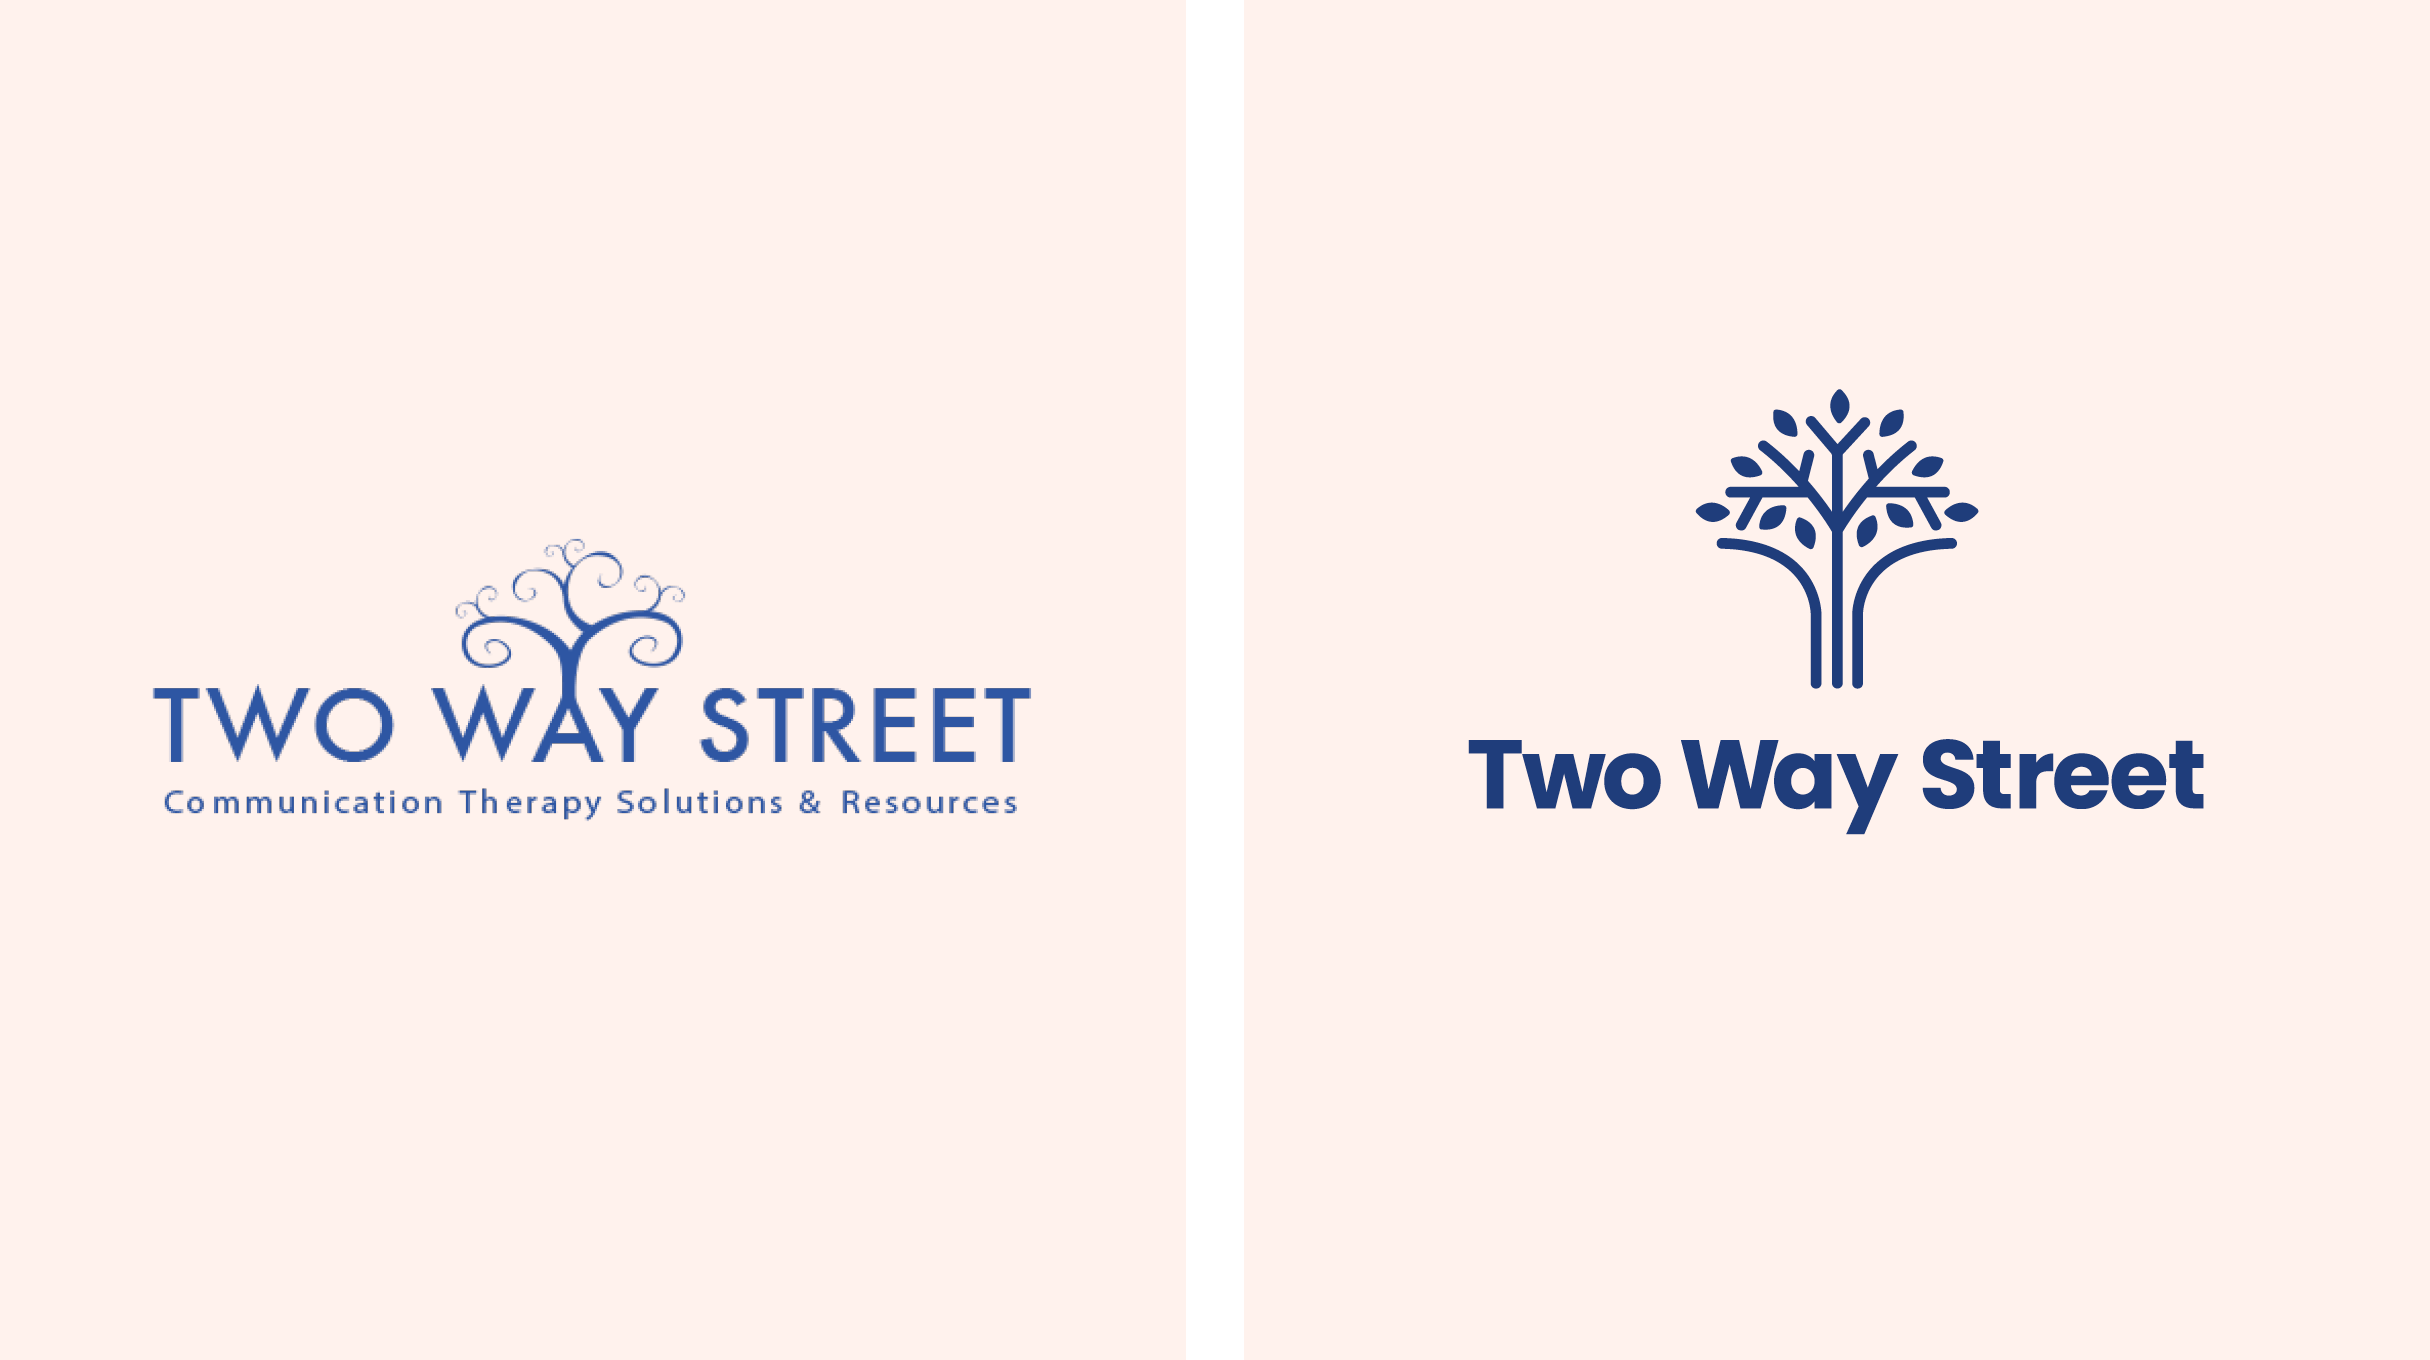 Two Way Street logo before and after